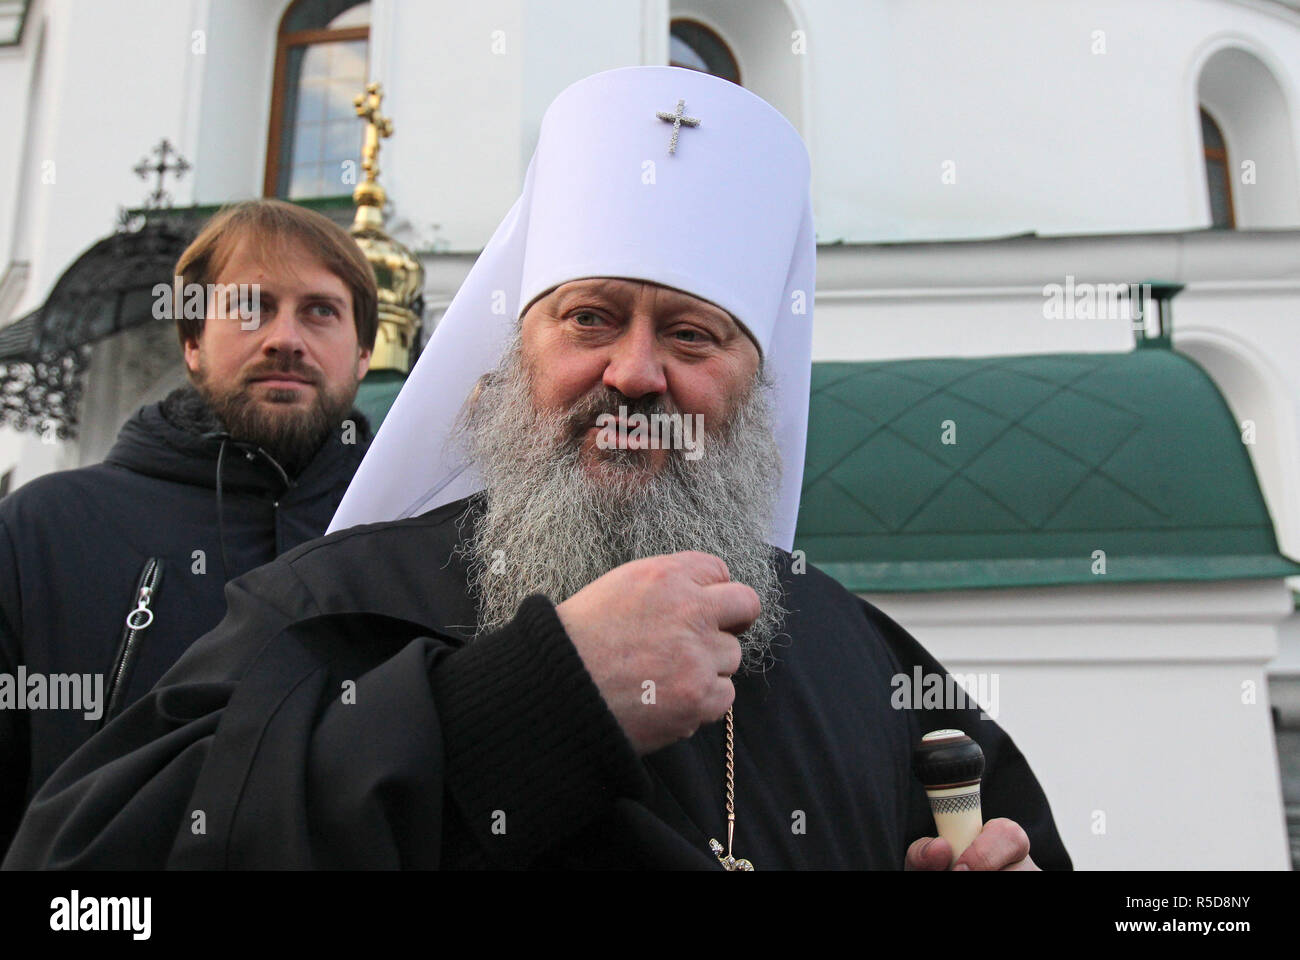 Metropolitan Pavlo (Pavel), a priest of the traditionally dominant Ukrainian Orthodox Church of Moscow Patriarchate and cleric of the Kiev Pechersk Lavra monastery seen leaving after his statement to the media in the monastery in Kiev, Ukraine. The Ukrainian Security Service searched the home of the father-superior of a major Kiev Orthodox monastery of the Ukrainian Orthodox Church of Moscow Patriarchate, who is suspected of inciting religious hatred, as a part of a criminal proceedings, Ukrainian Security Service said. Credit: SOPA Images Limited/Alamy Live News Stock Photo